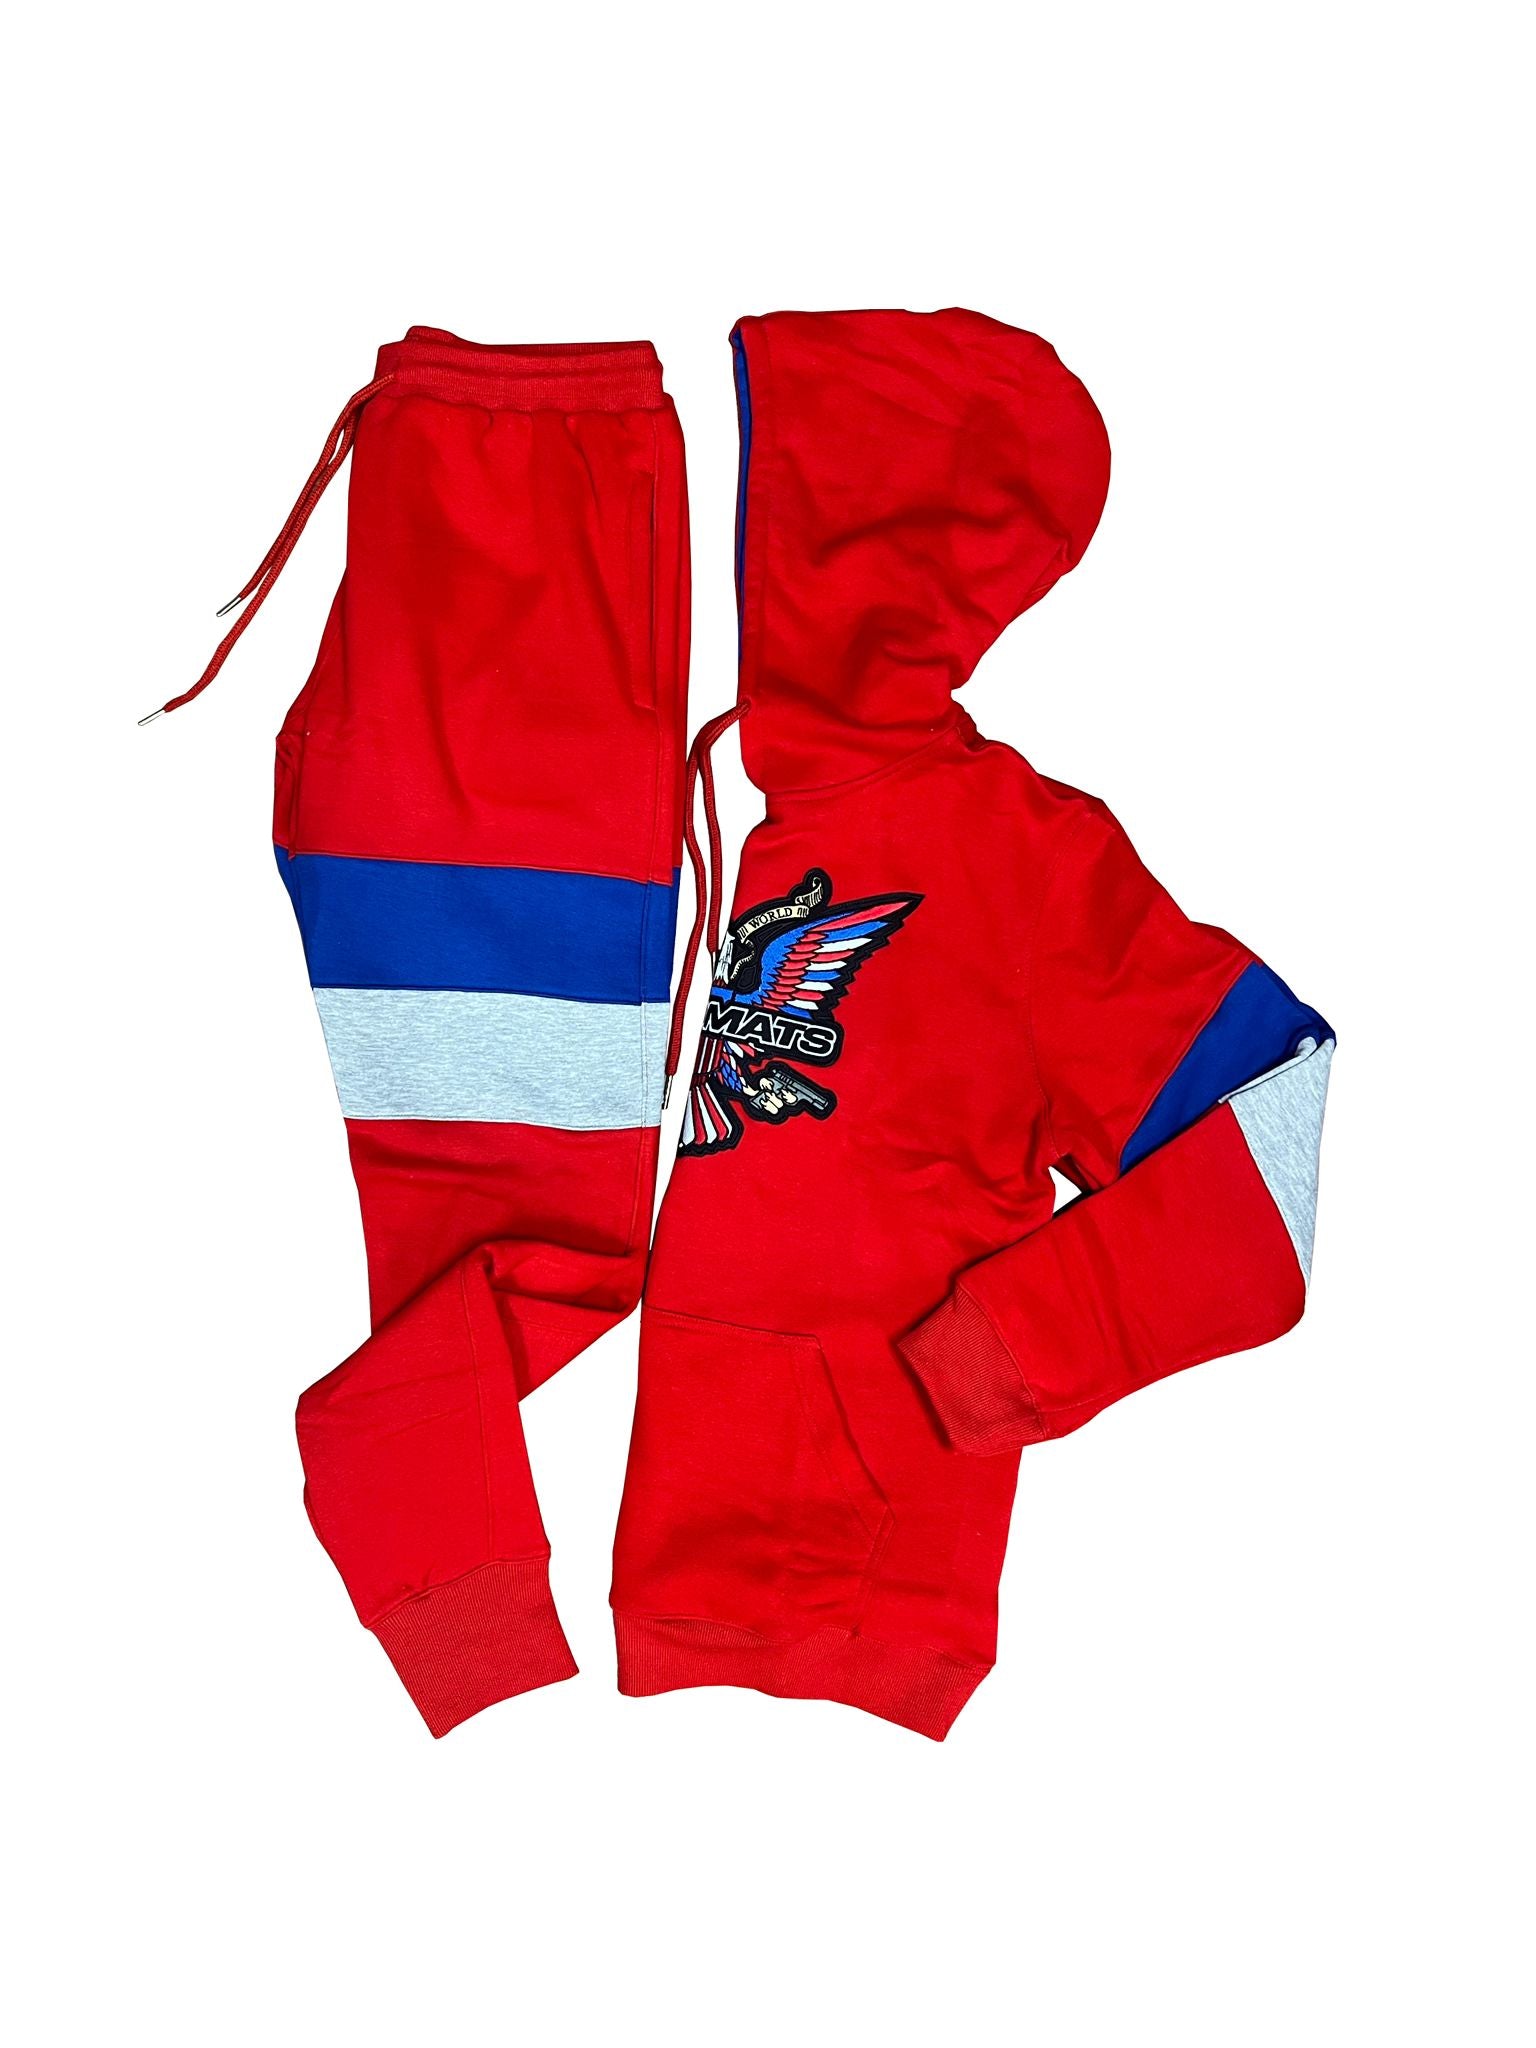 Dipset Couture Red/Blue/Grey Sweatsuit